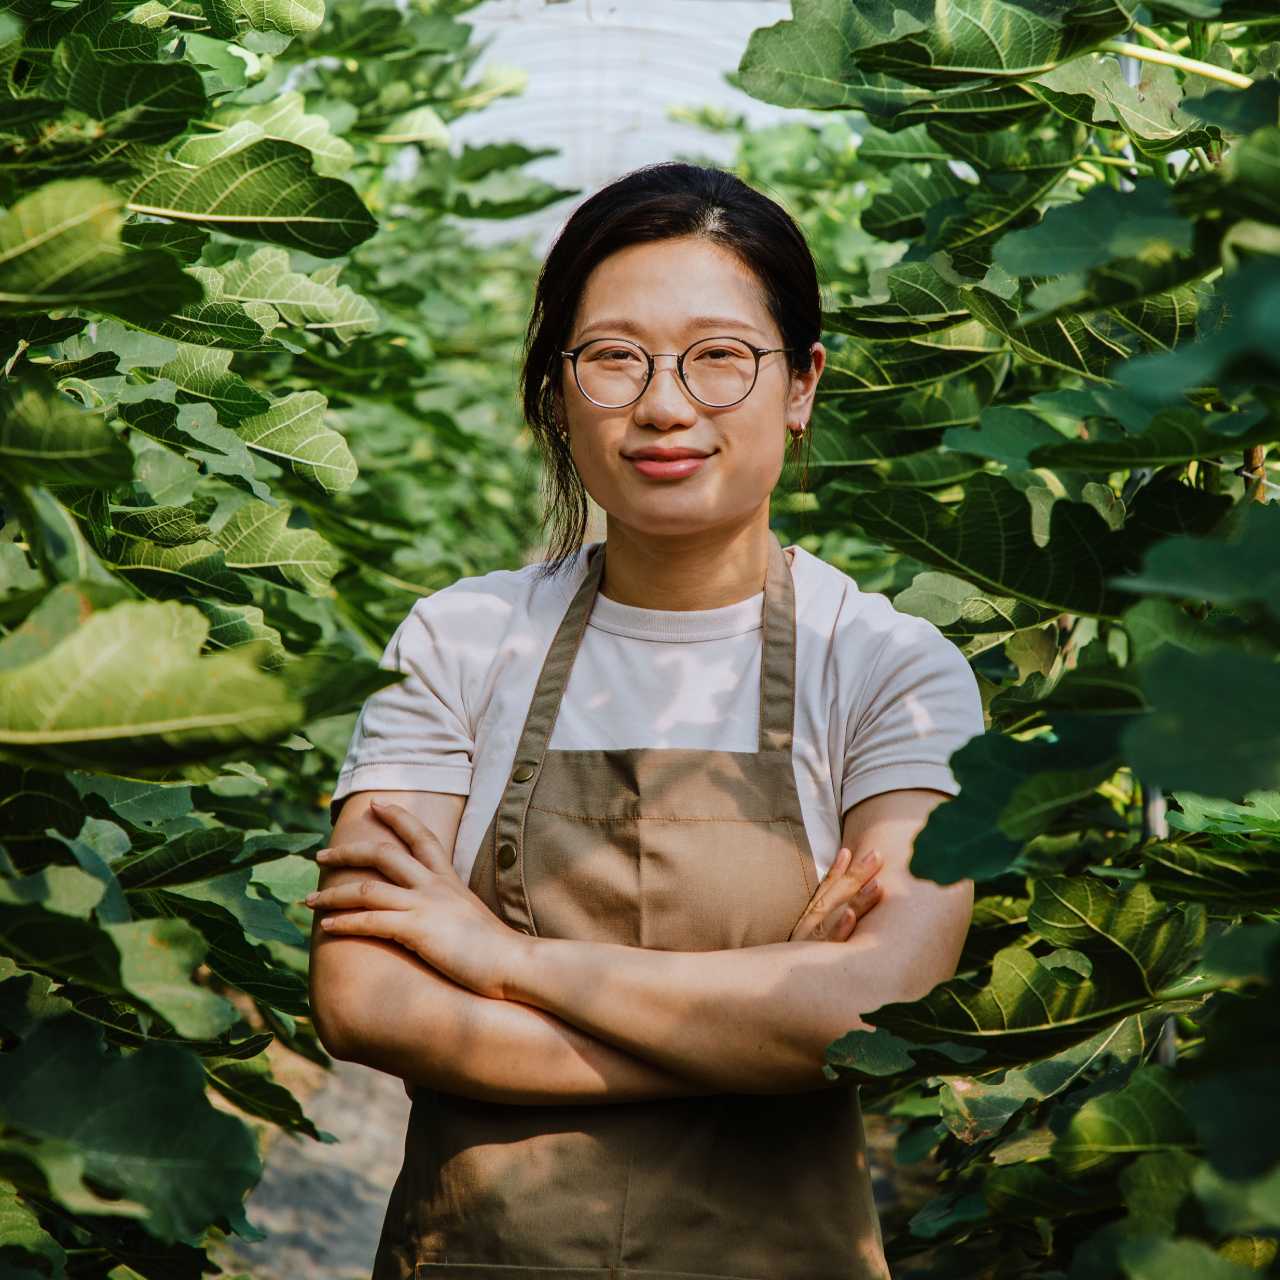 Woman with glasses and brown overalls in greenhouse posing for camera 